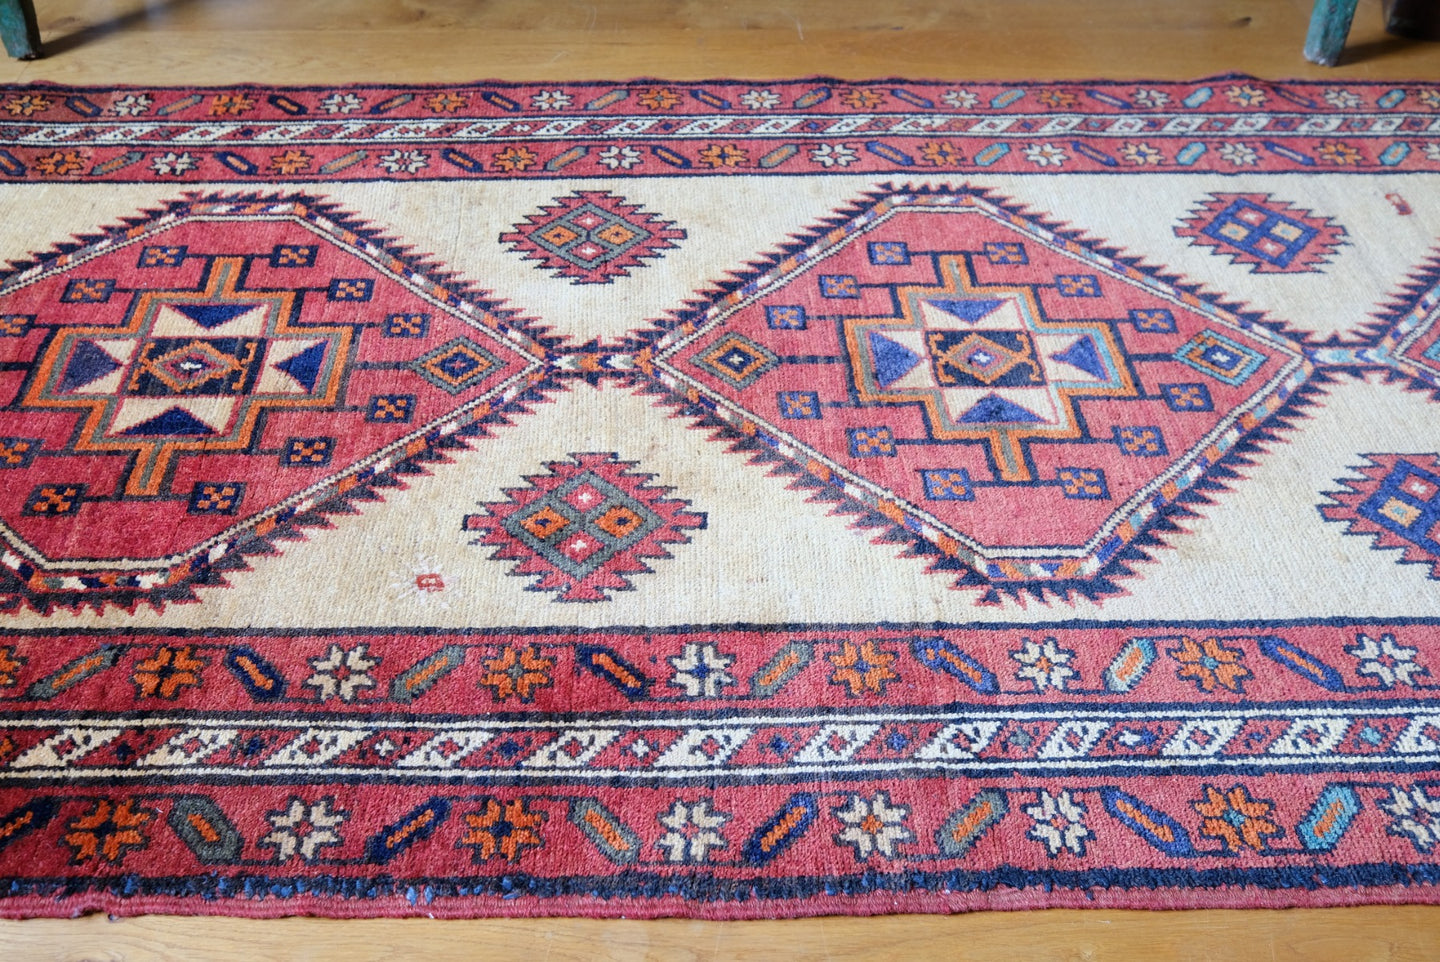 Textiles: Antique & Vintage Handmade Rugs, Runners & Other Textiles